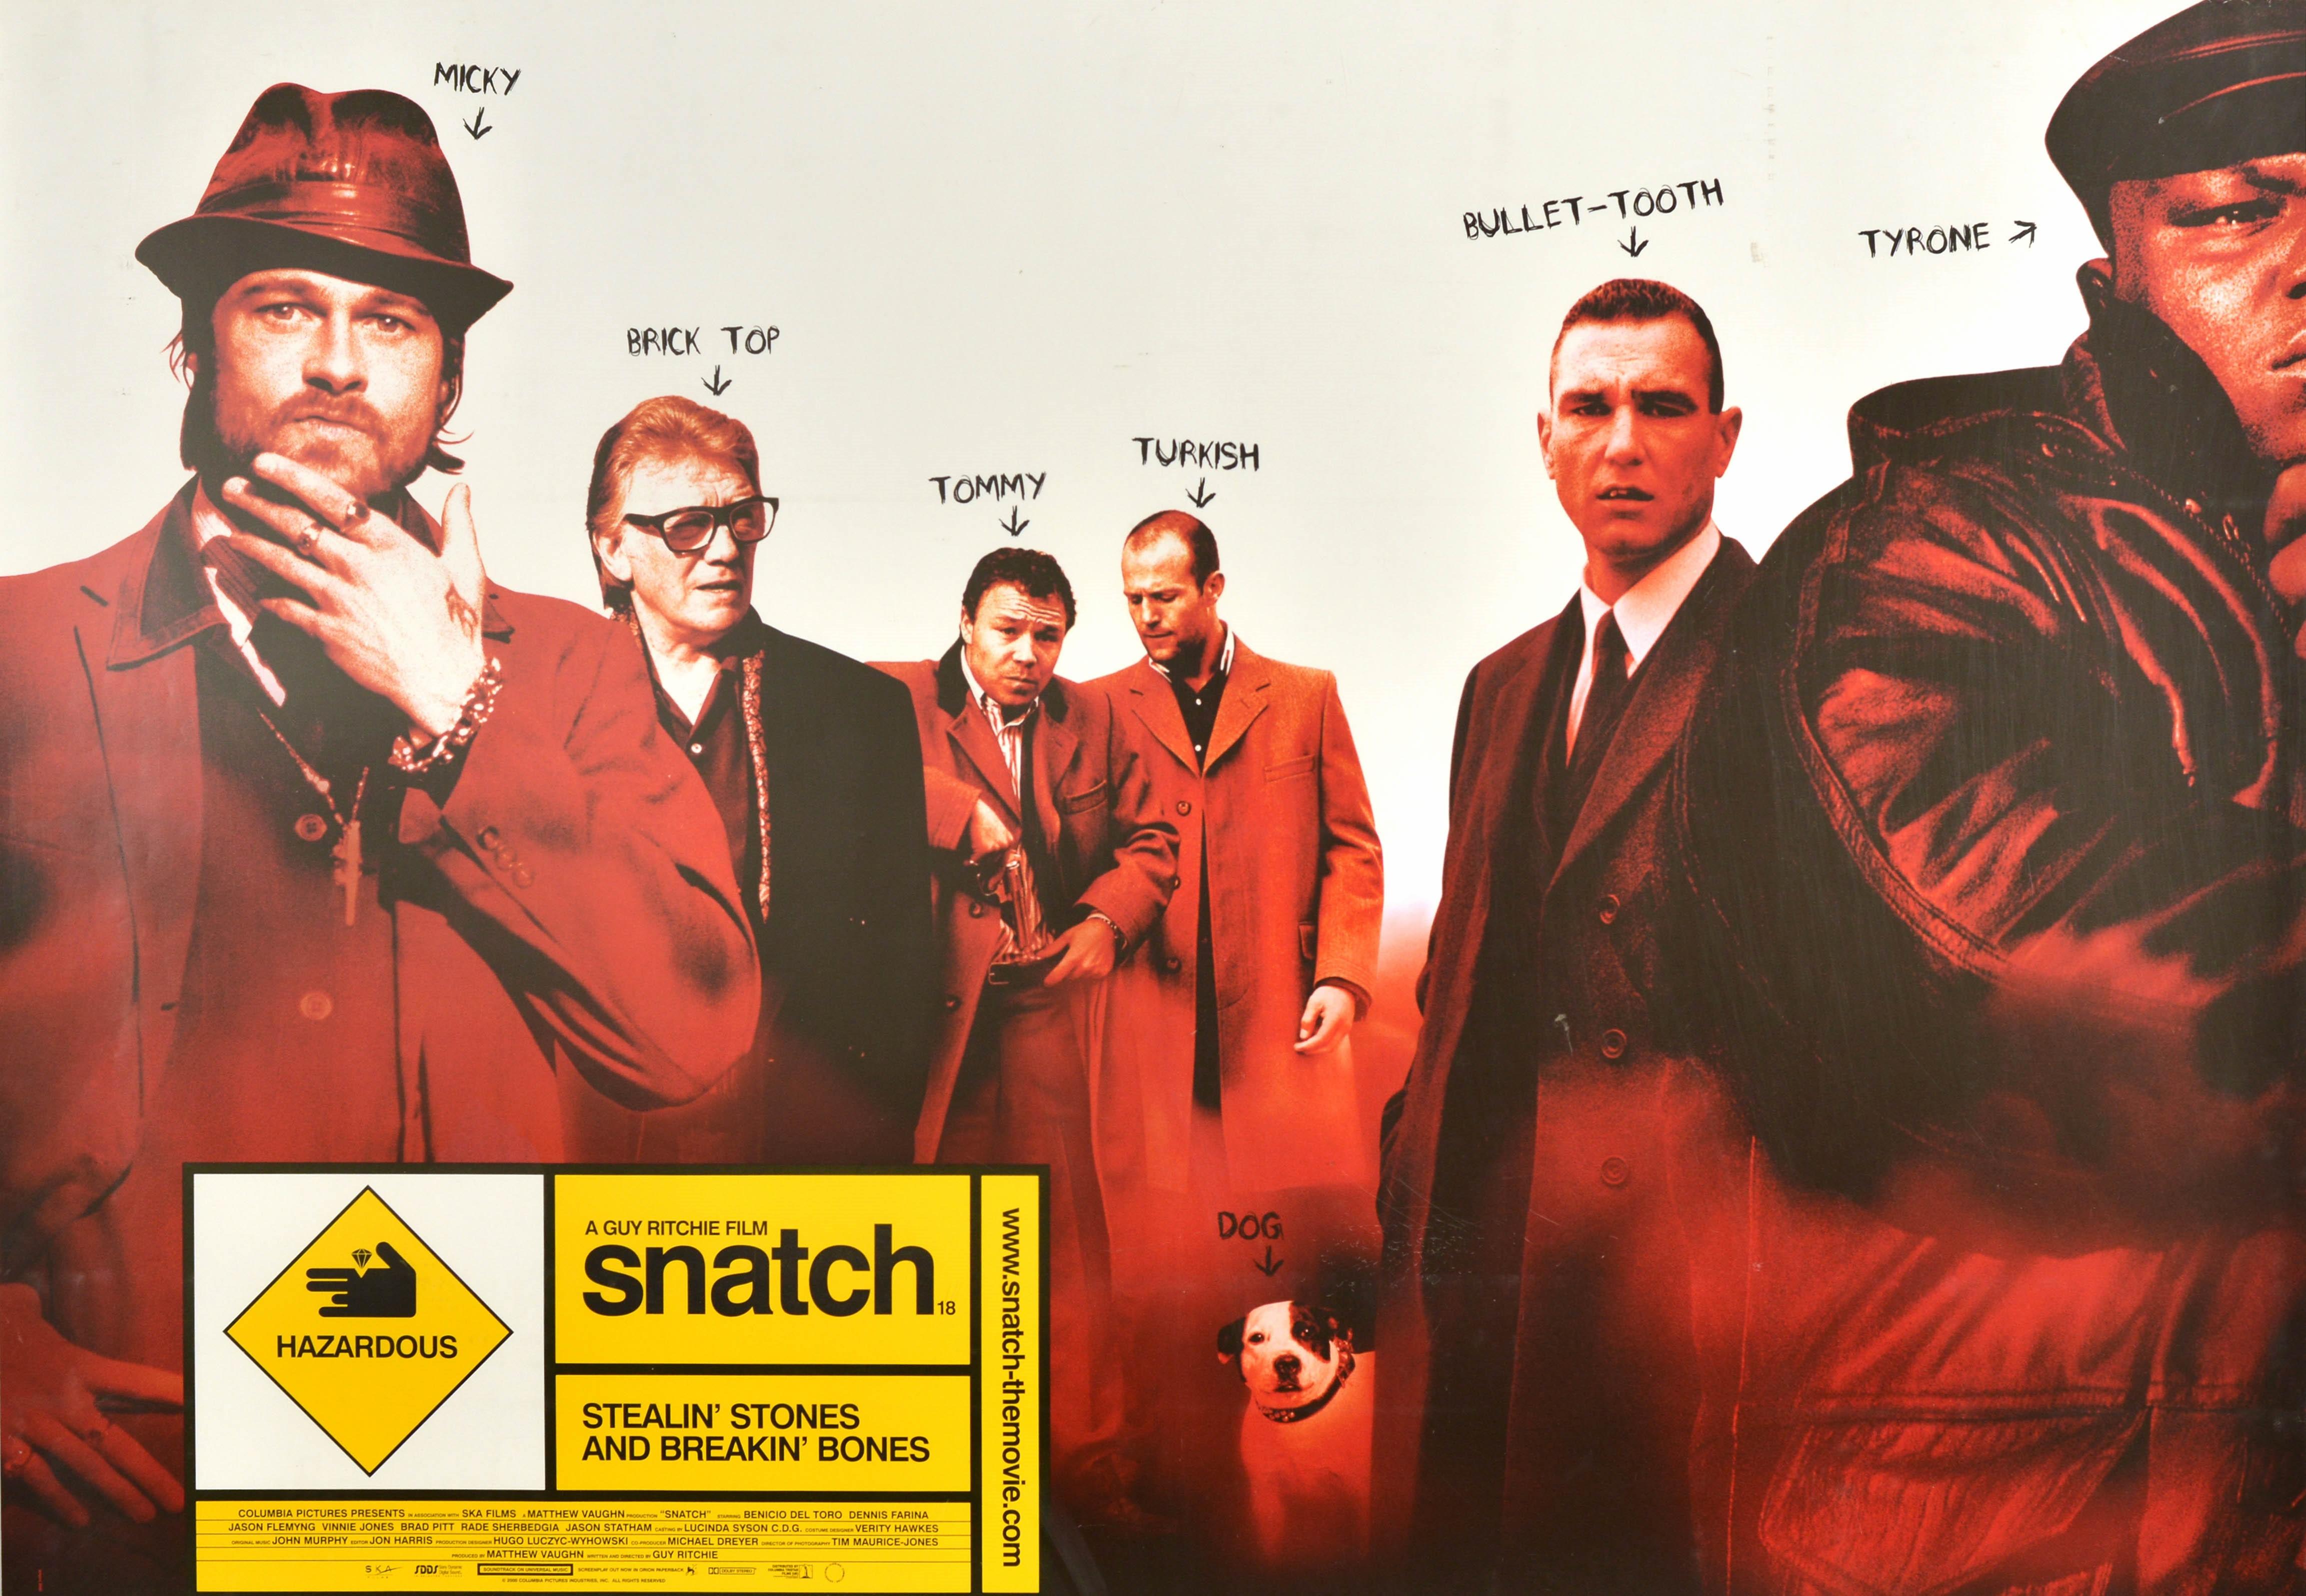 Original Vintage Film Poster For Snatch Crime Comedy Movie Guy Ritchie Brad Pitt - Print by Unknown